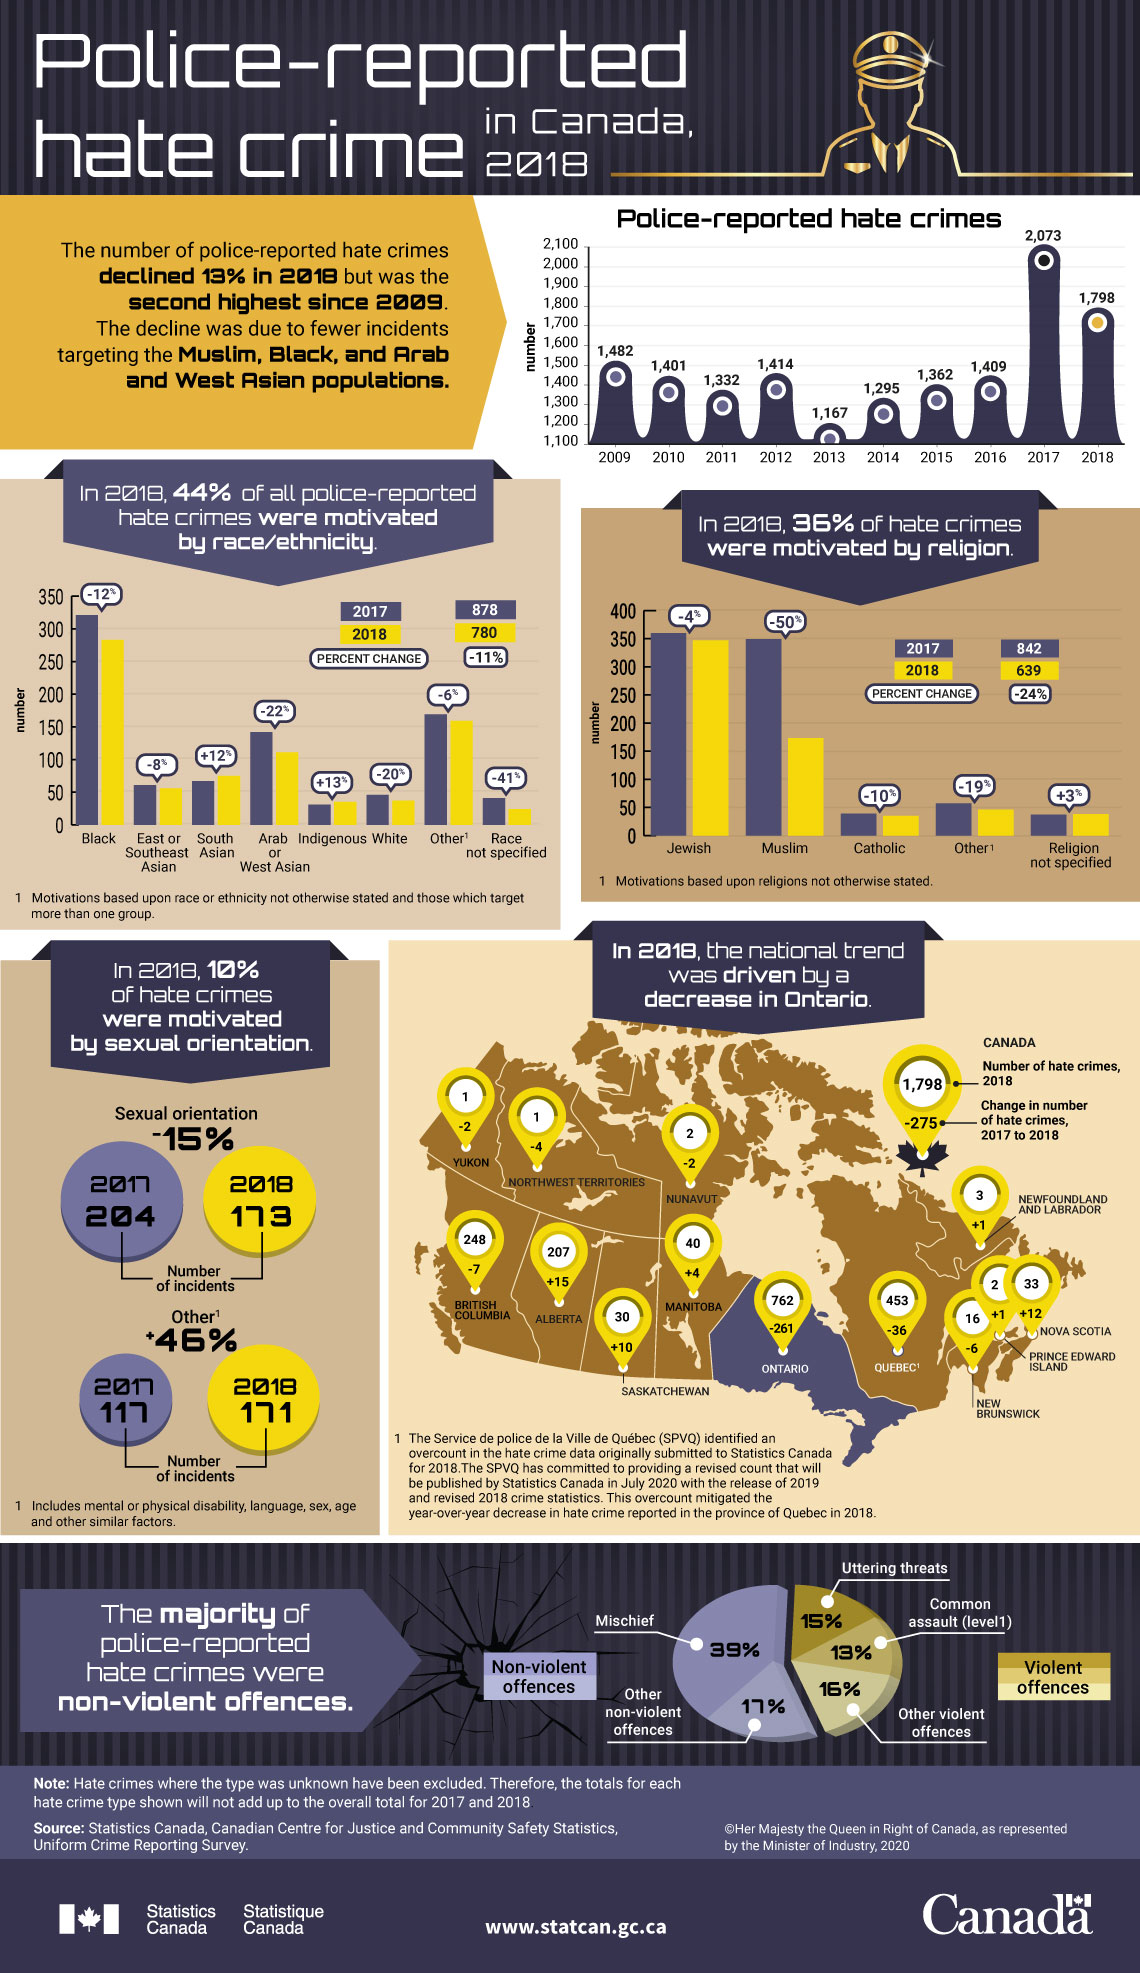 Infographic: Police-reported hate crime in Canada, 2018